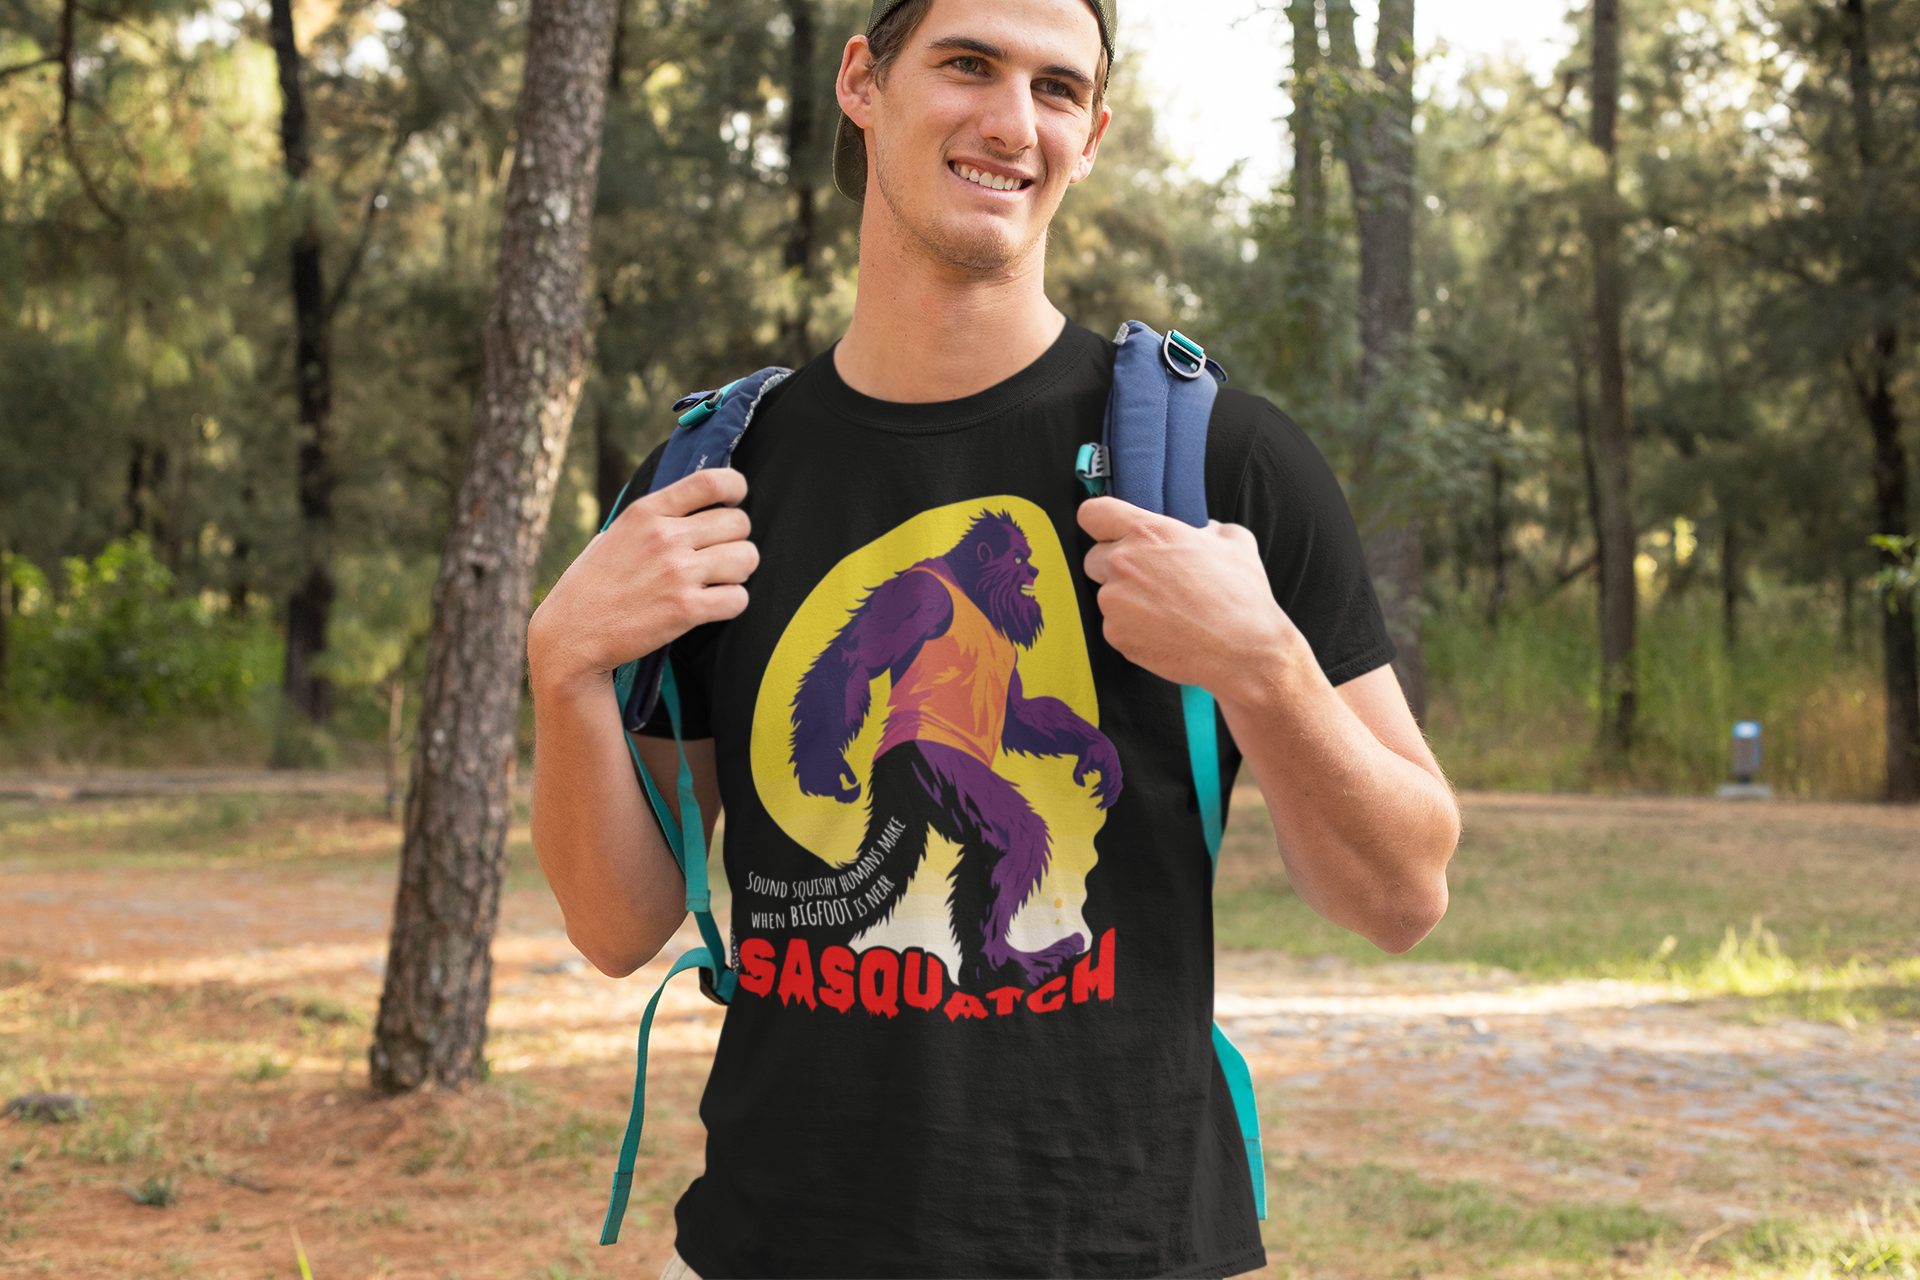 Backpacker wearing the SASQUATCH shirt in a forrest.